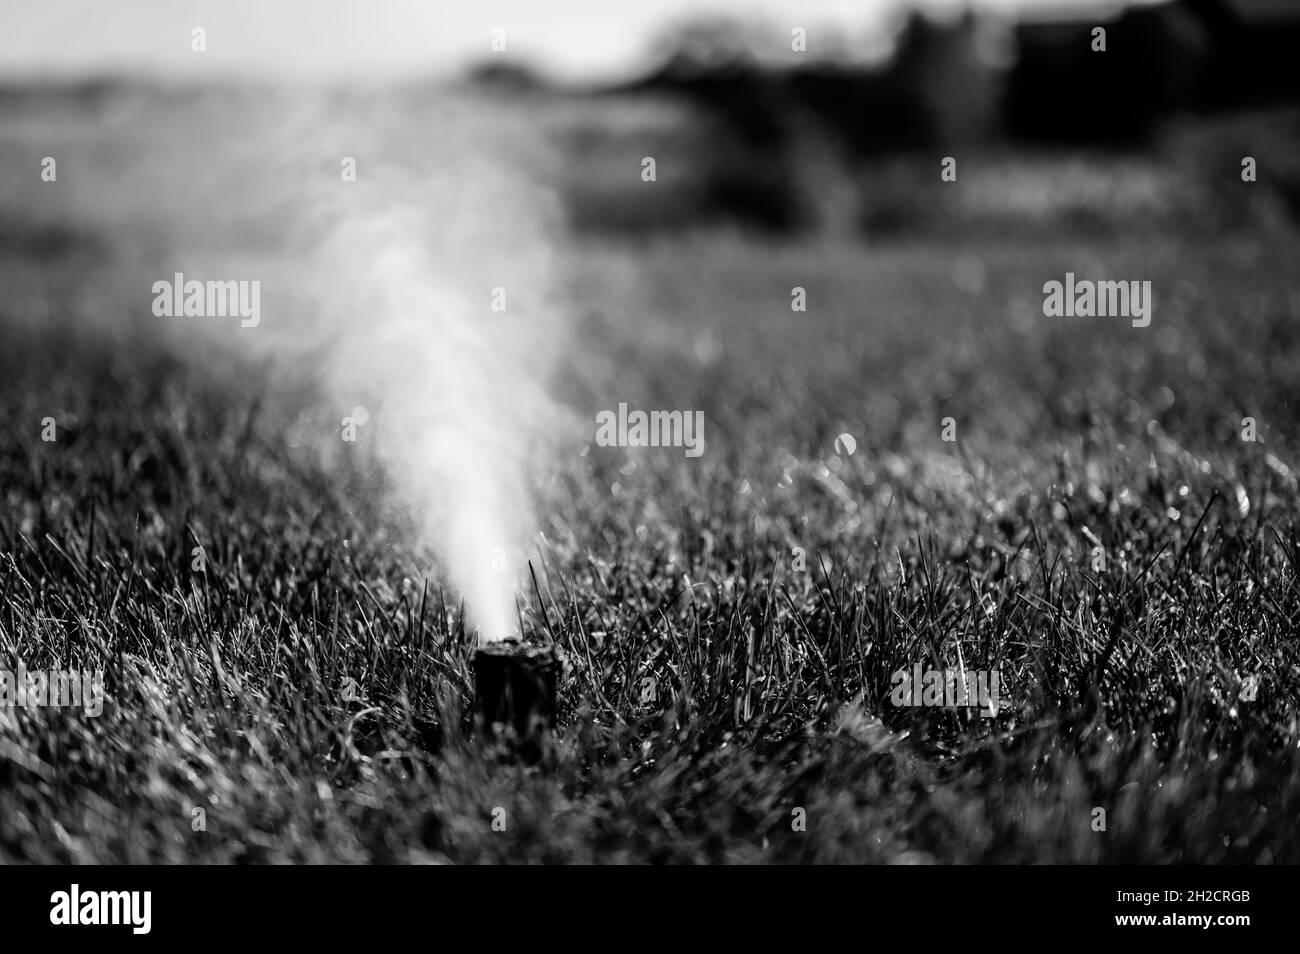 winterizing a irrigation sprinkler system by blowing pressurized air through to clear out water Stock Photo